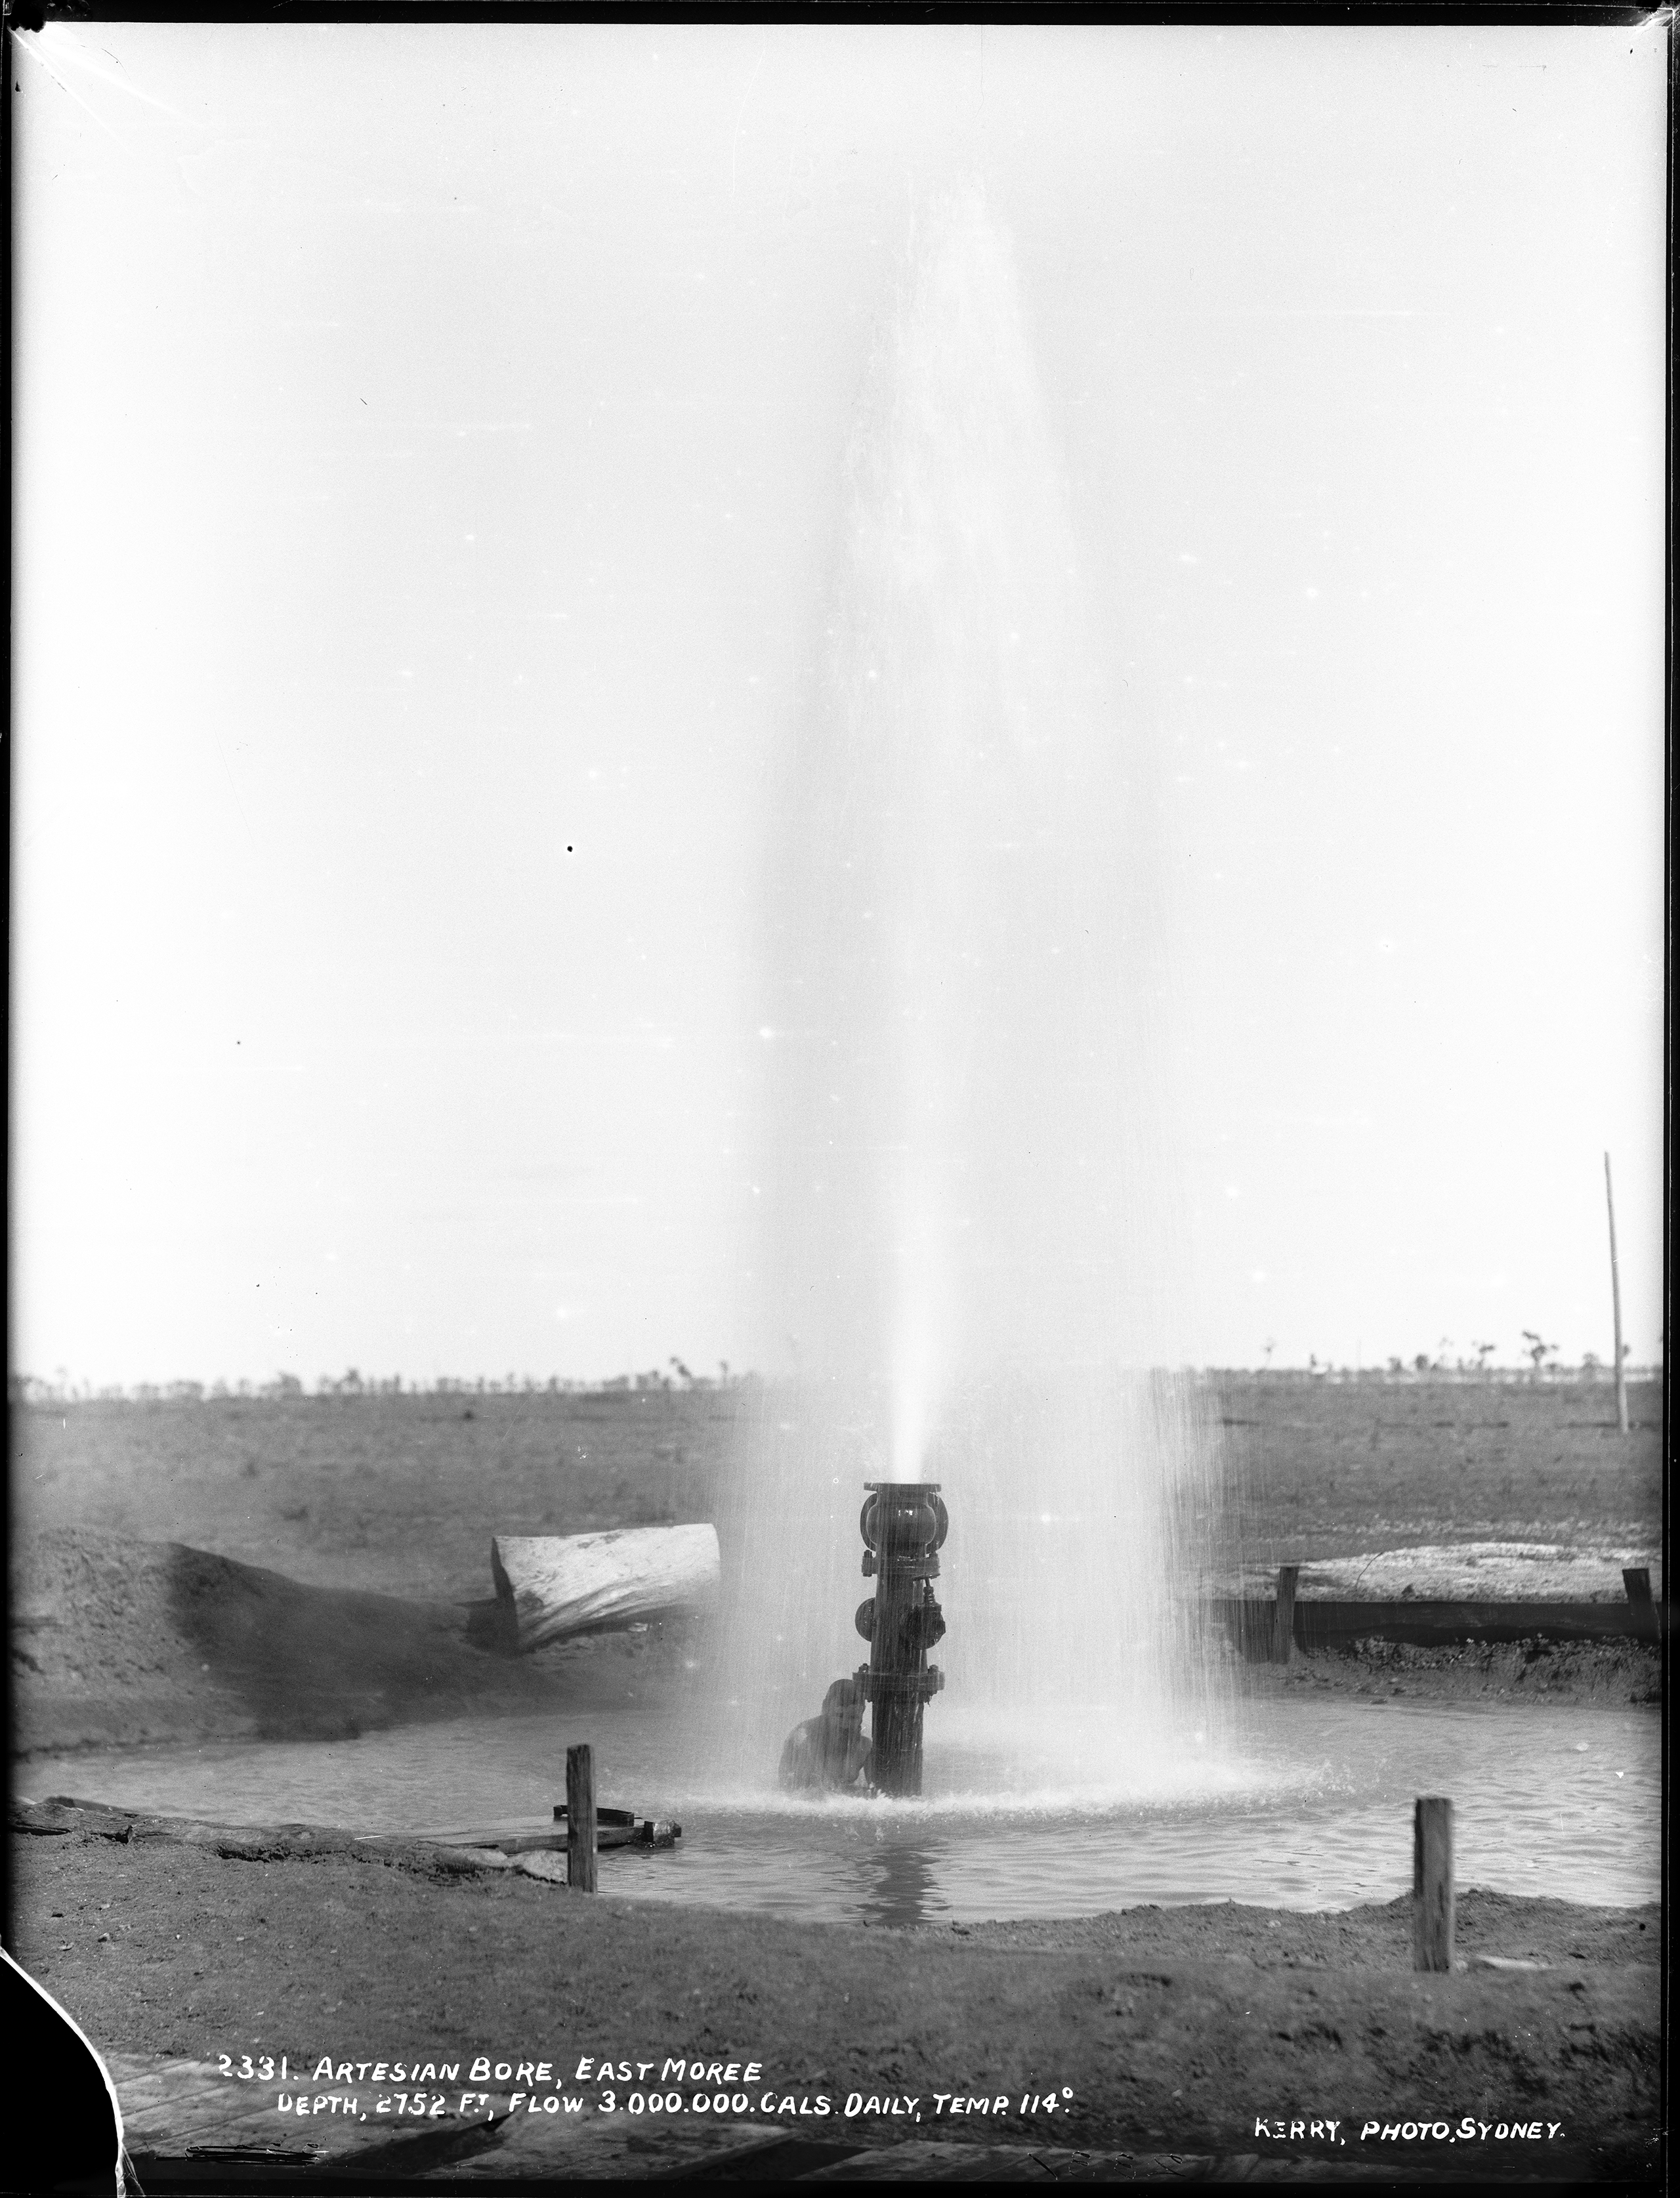 'Artesian Bore, East Moree' by Kerry and Co